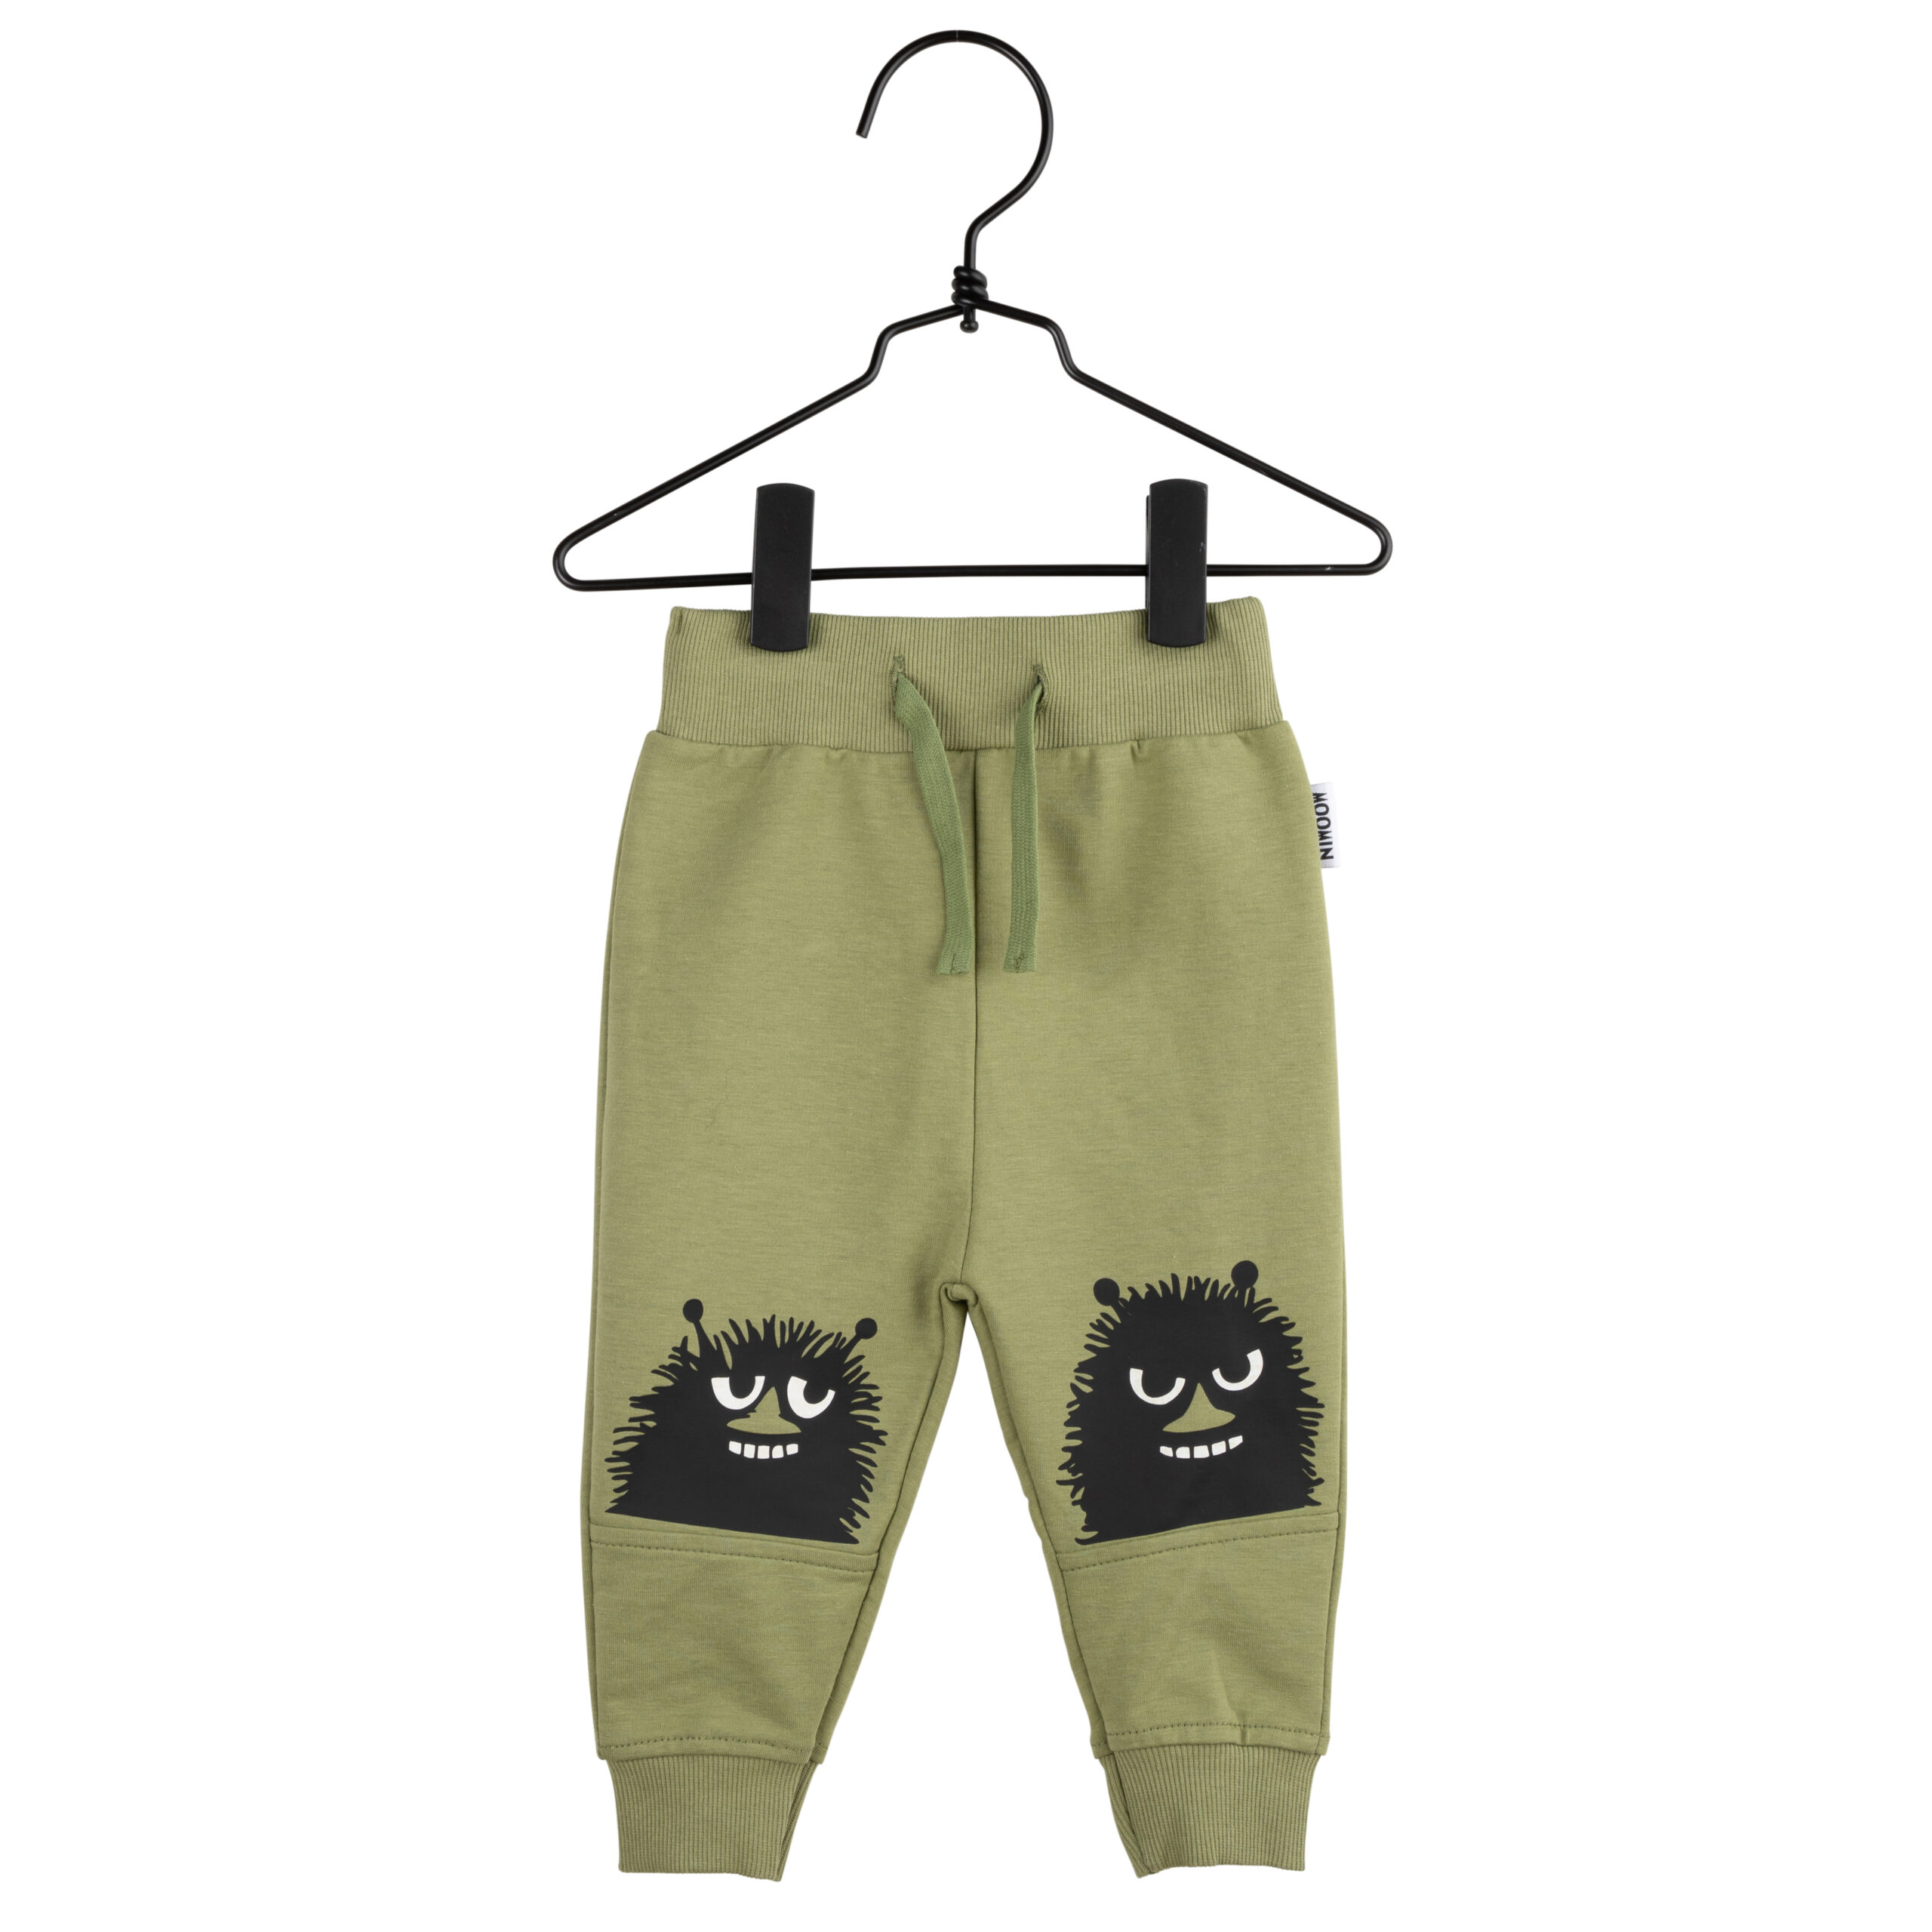 Apparel » Moomin products